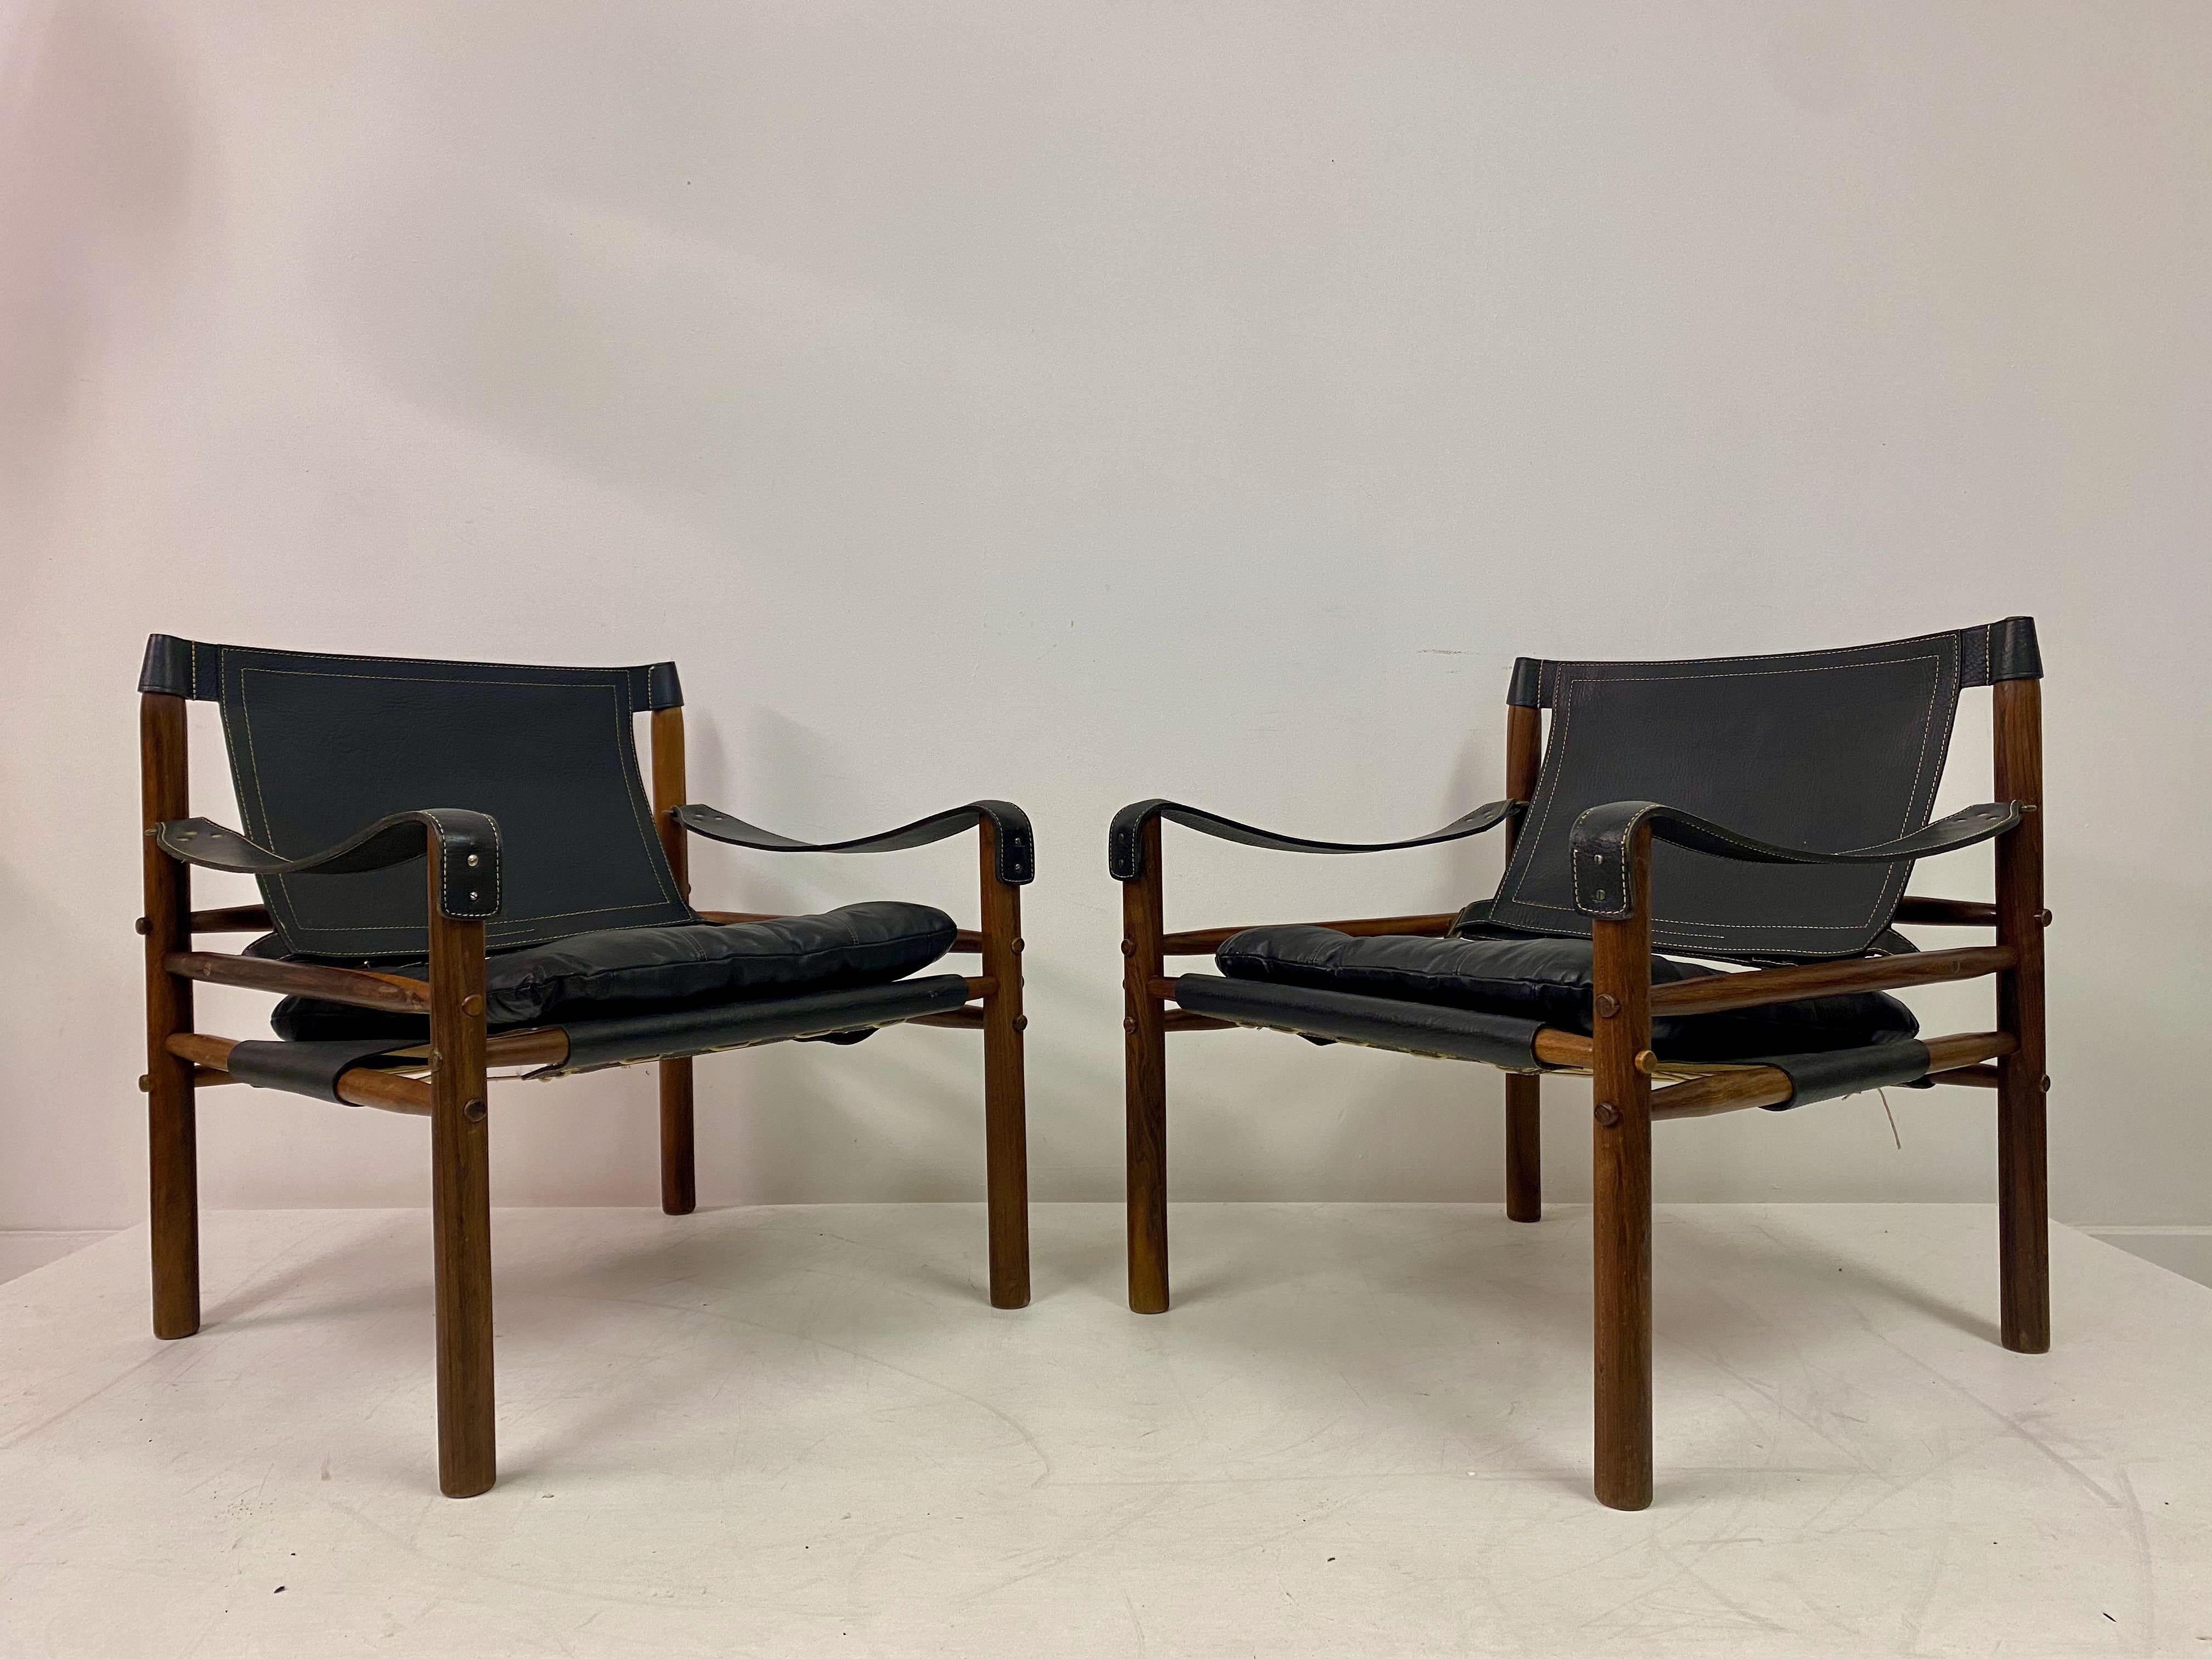 20th Century Pair of Leather and Rosewood Sirocco Safari Chairs by Arne Norell